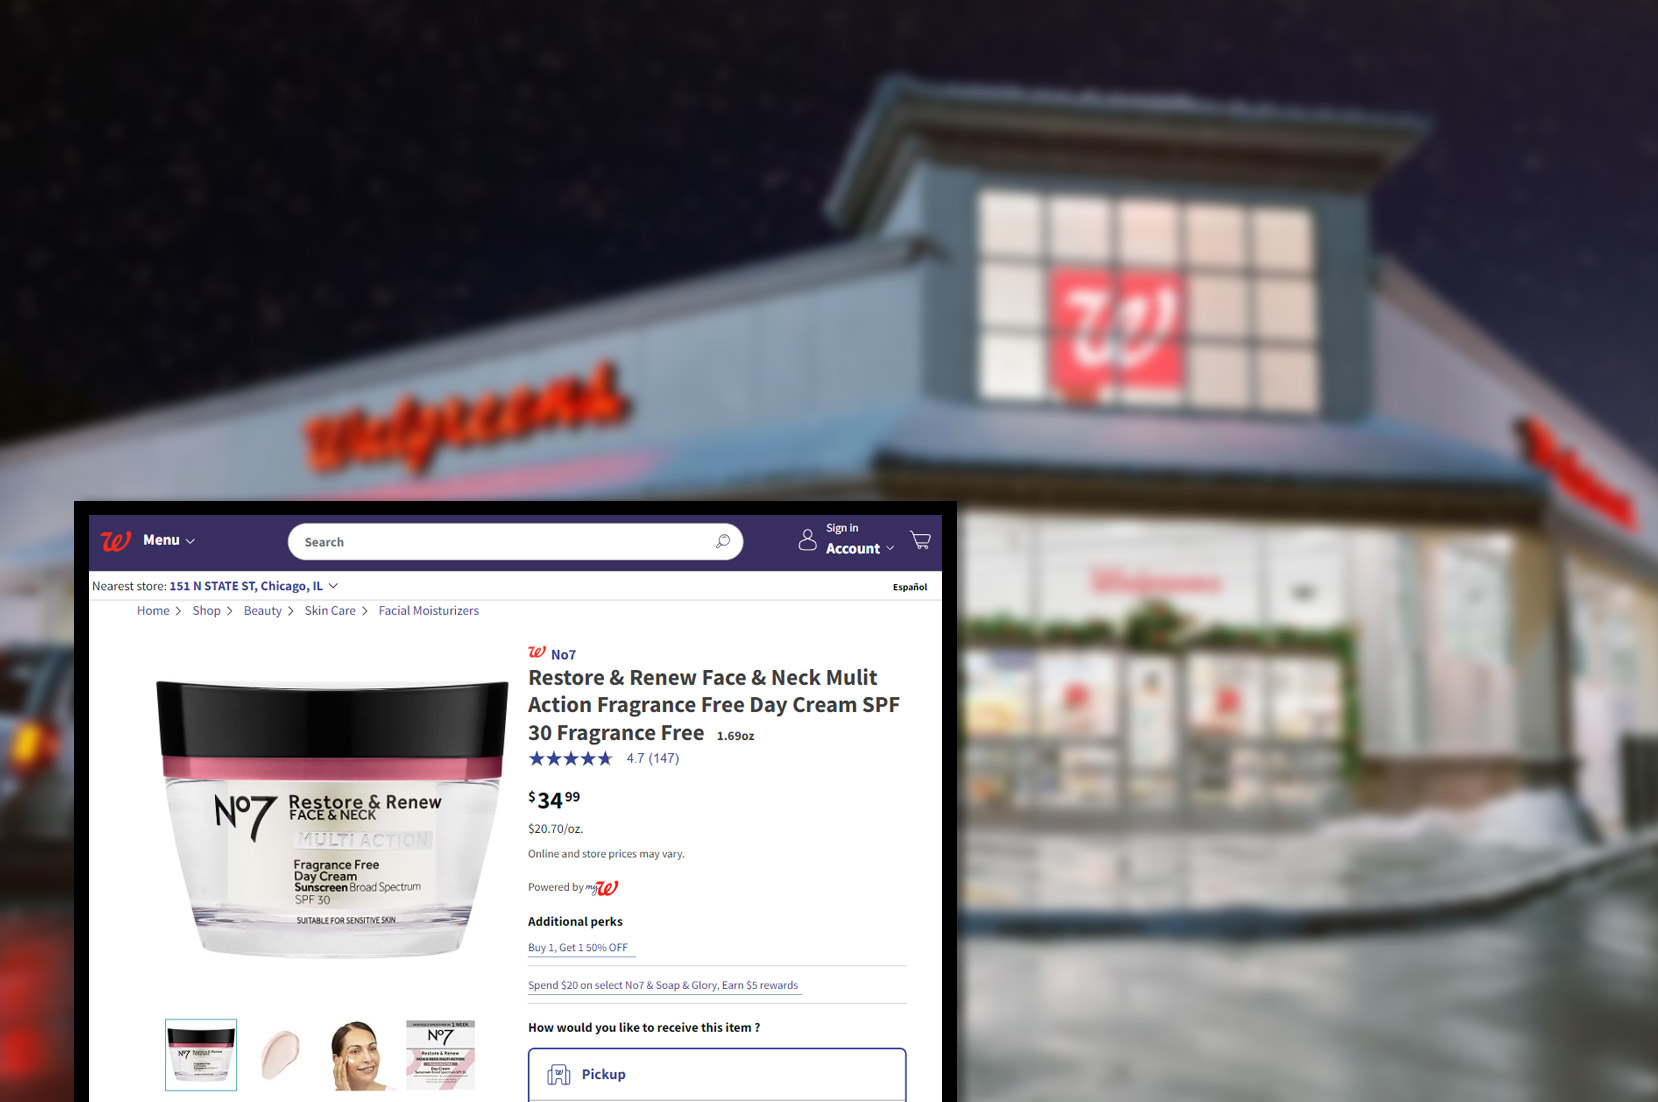 walgreens-comproduct-pricing-information-and-image-scraping-services